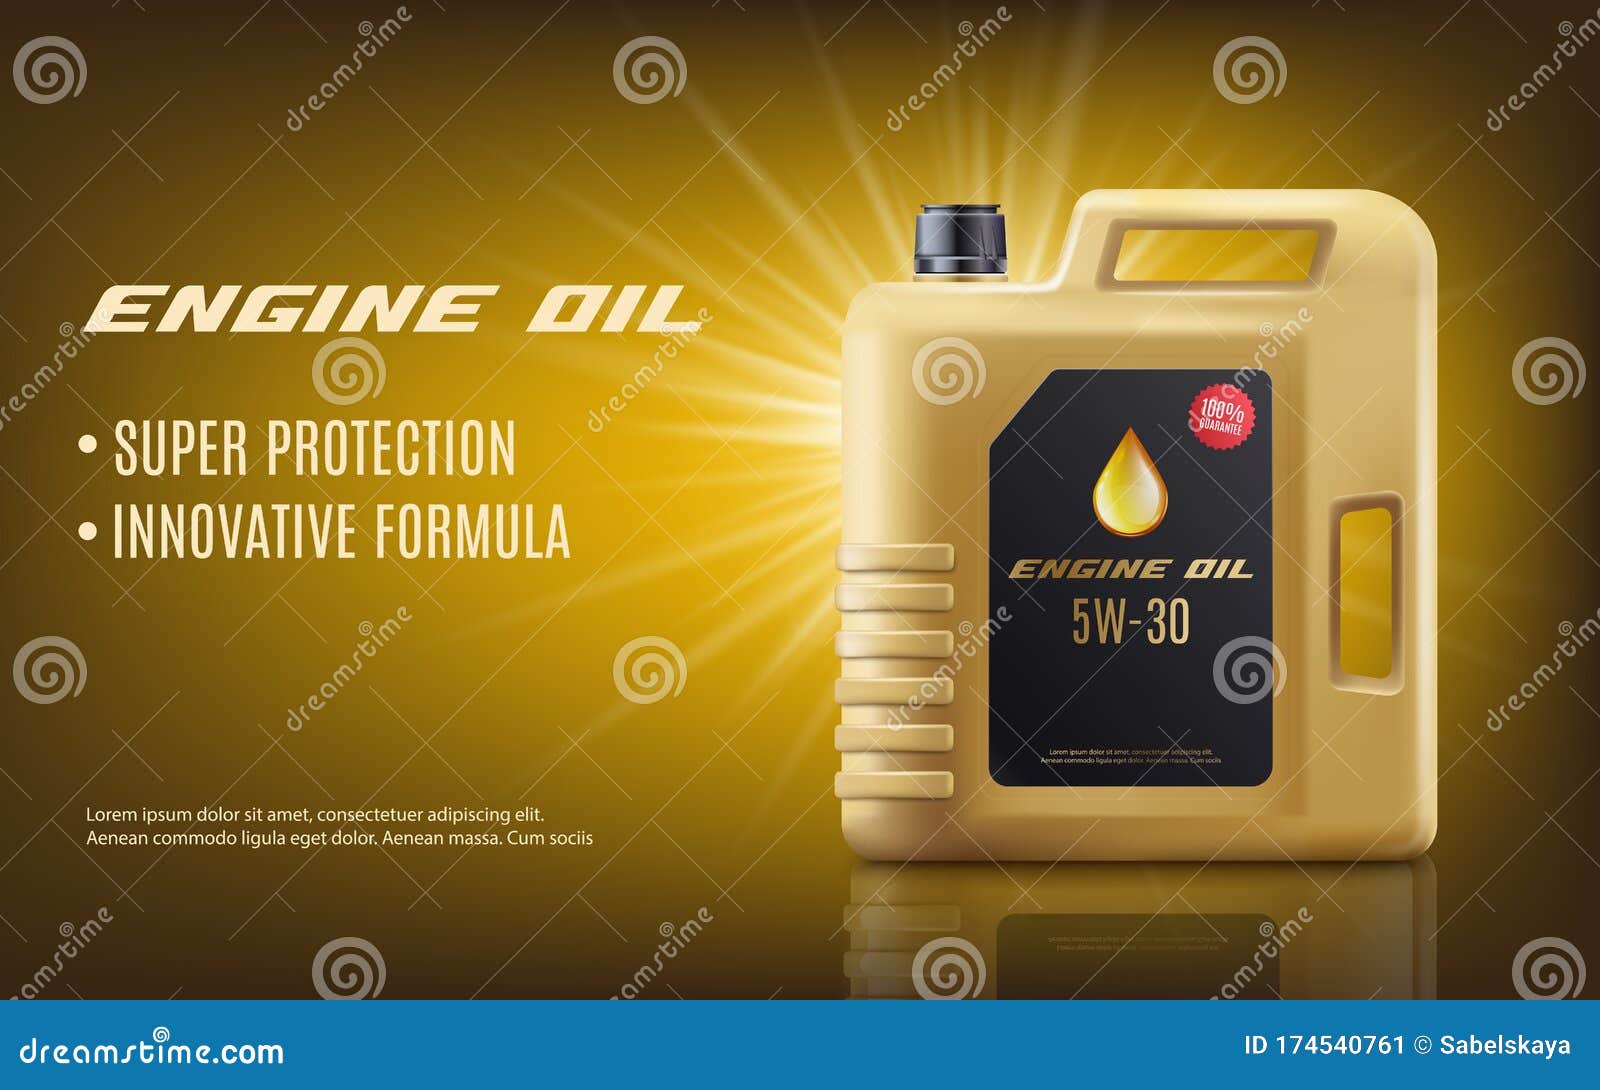 Engine Oil Ad Poster Mockup With Realistic Golden Machine Oil Canister Stock Vector ...